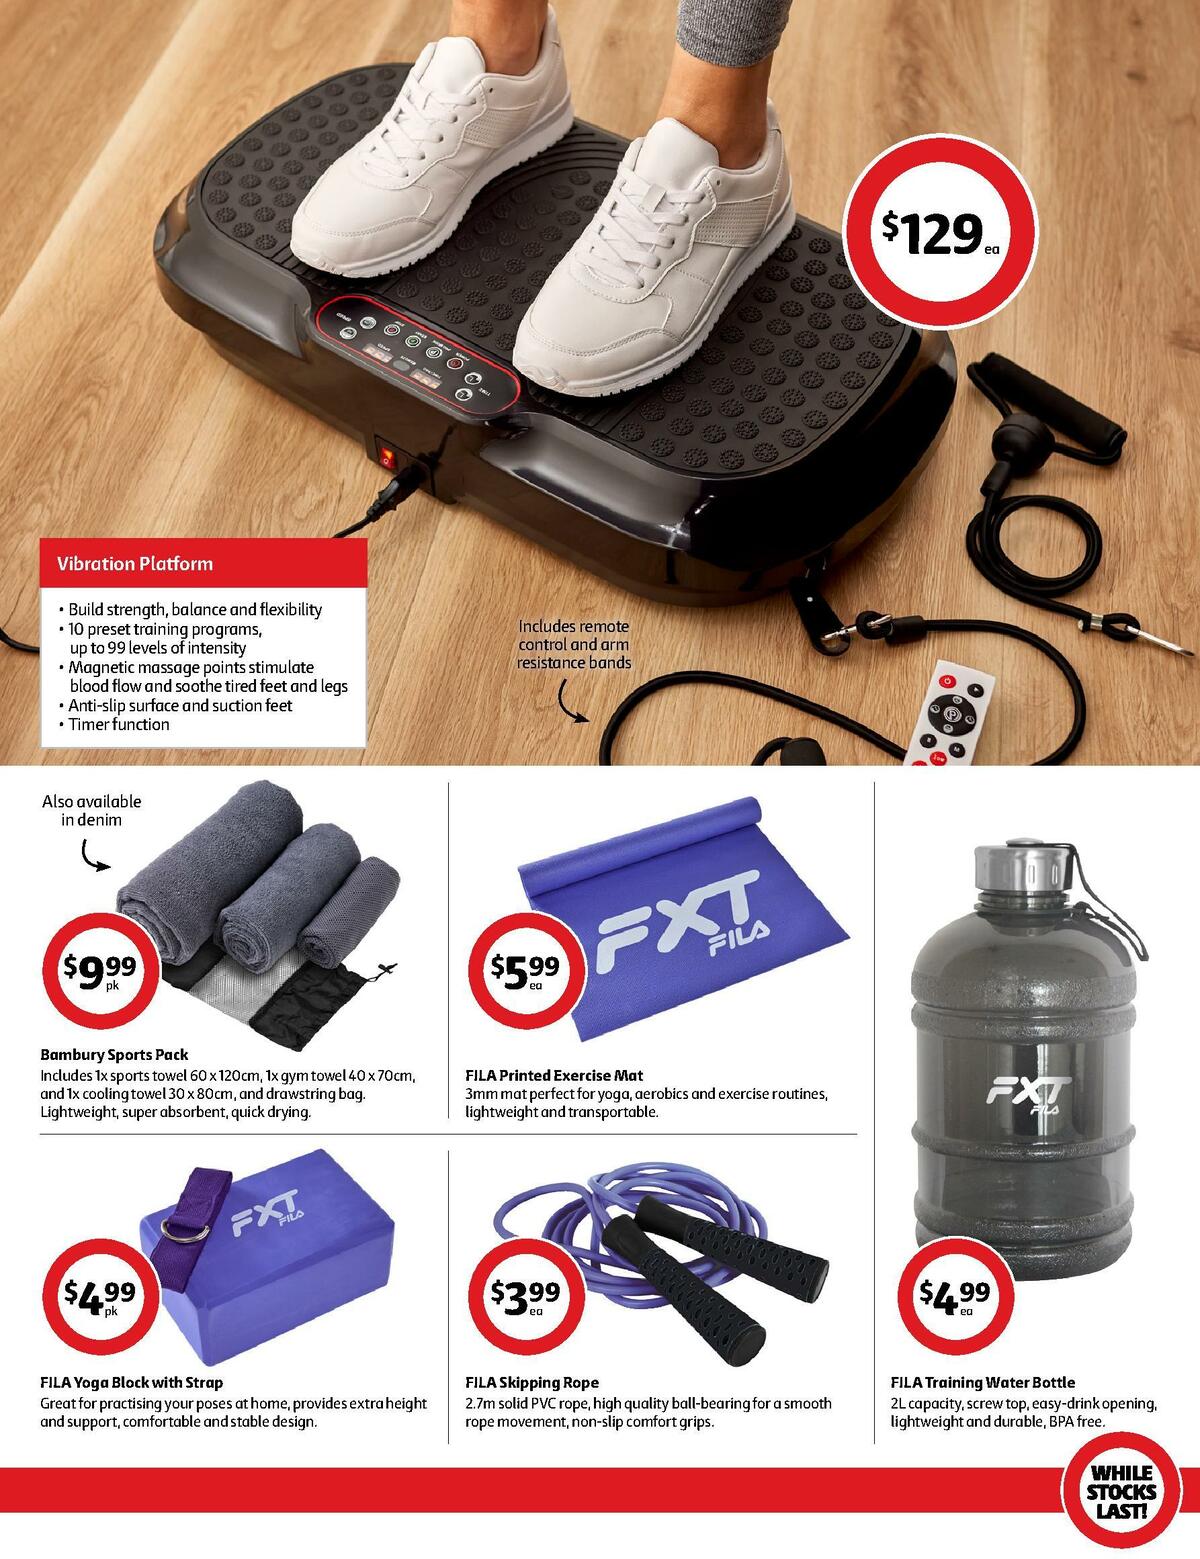 Coles Best Buys - Home Fitness Catalogues from 29 July